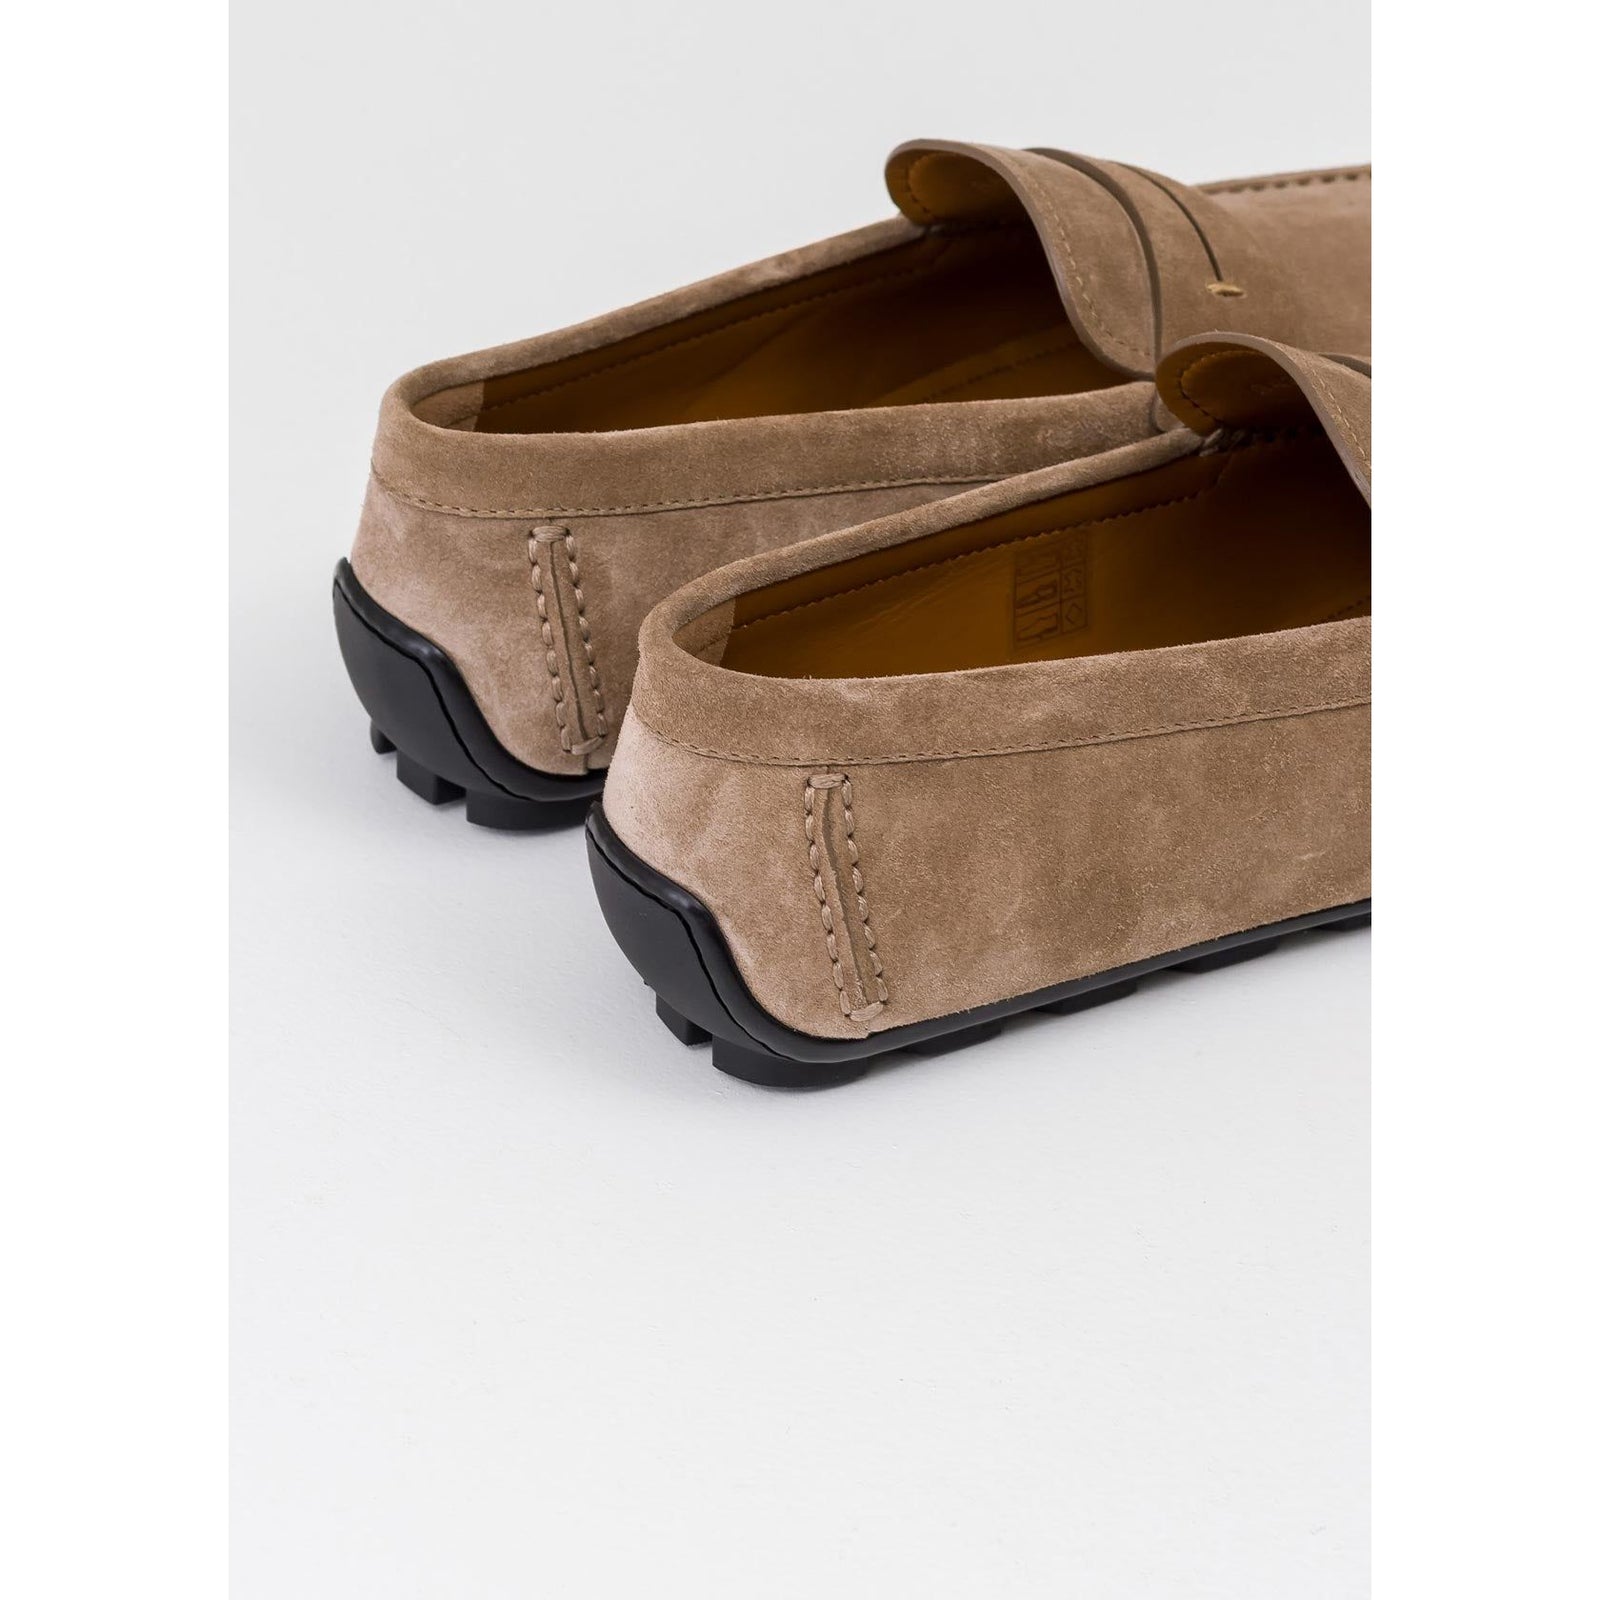 SUEDE HIGHWAY DRIVING SHOE WITH L'ASOLA BAND - Yooto